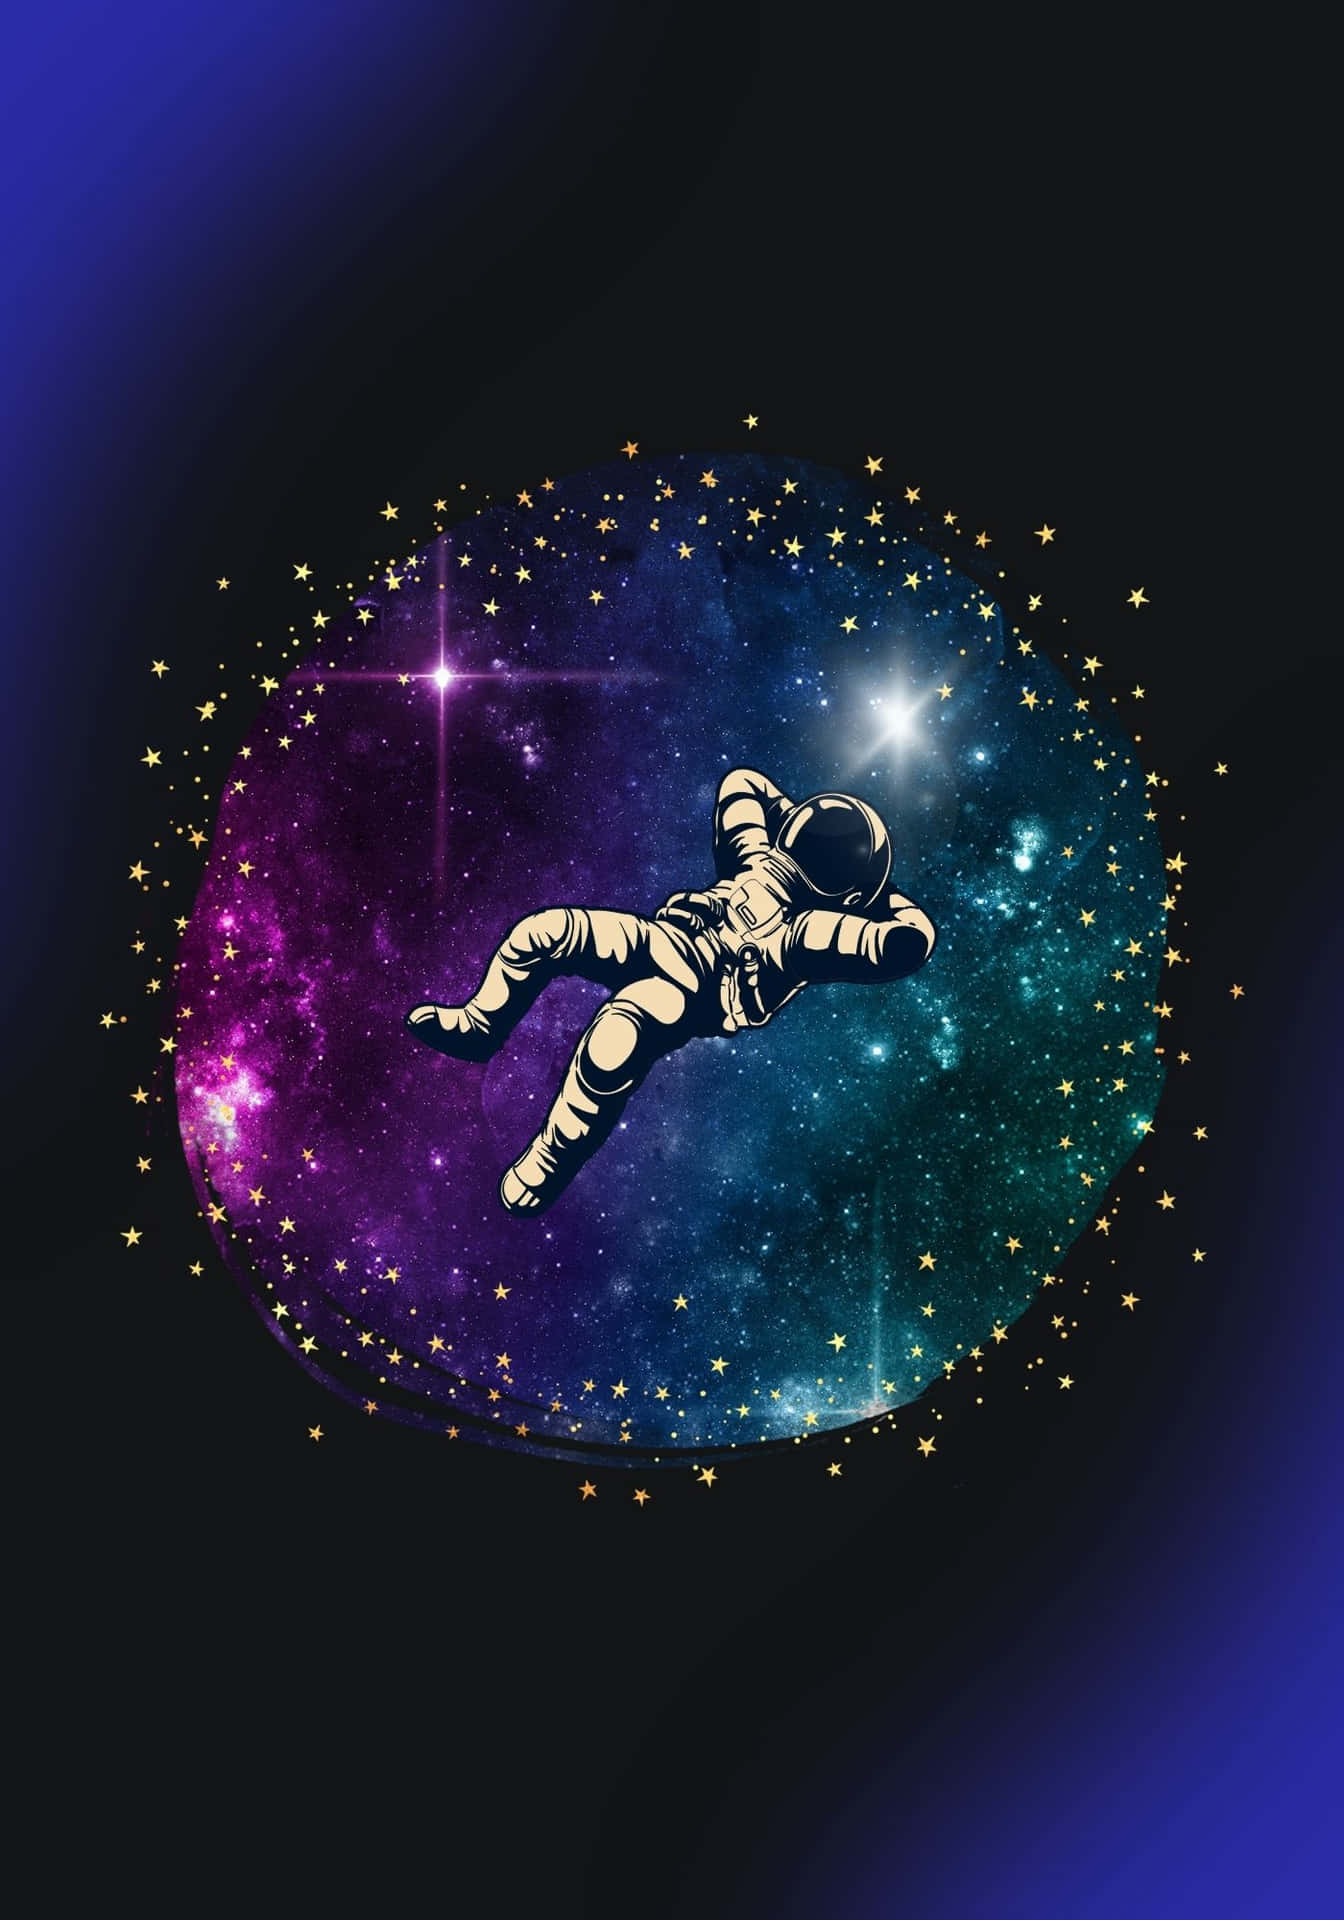 Cool Floating Astronaut On Space Background